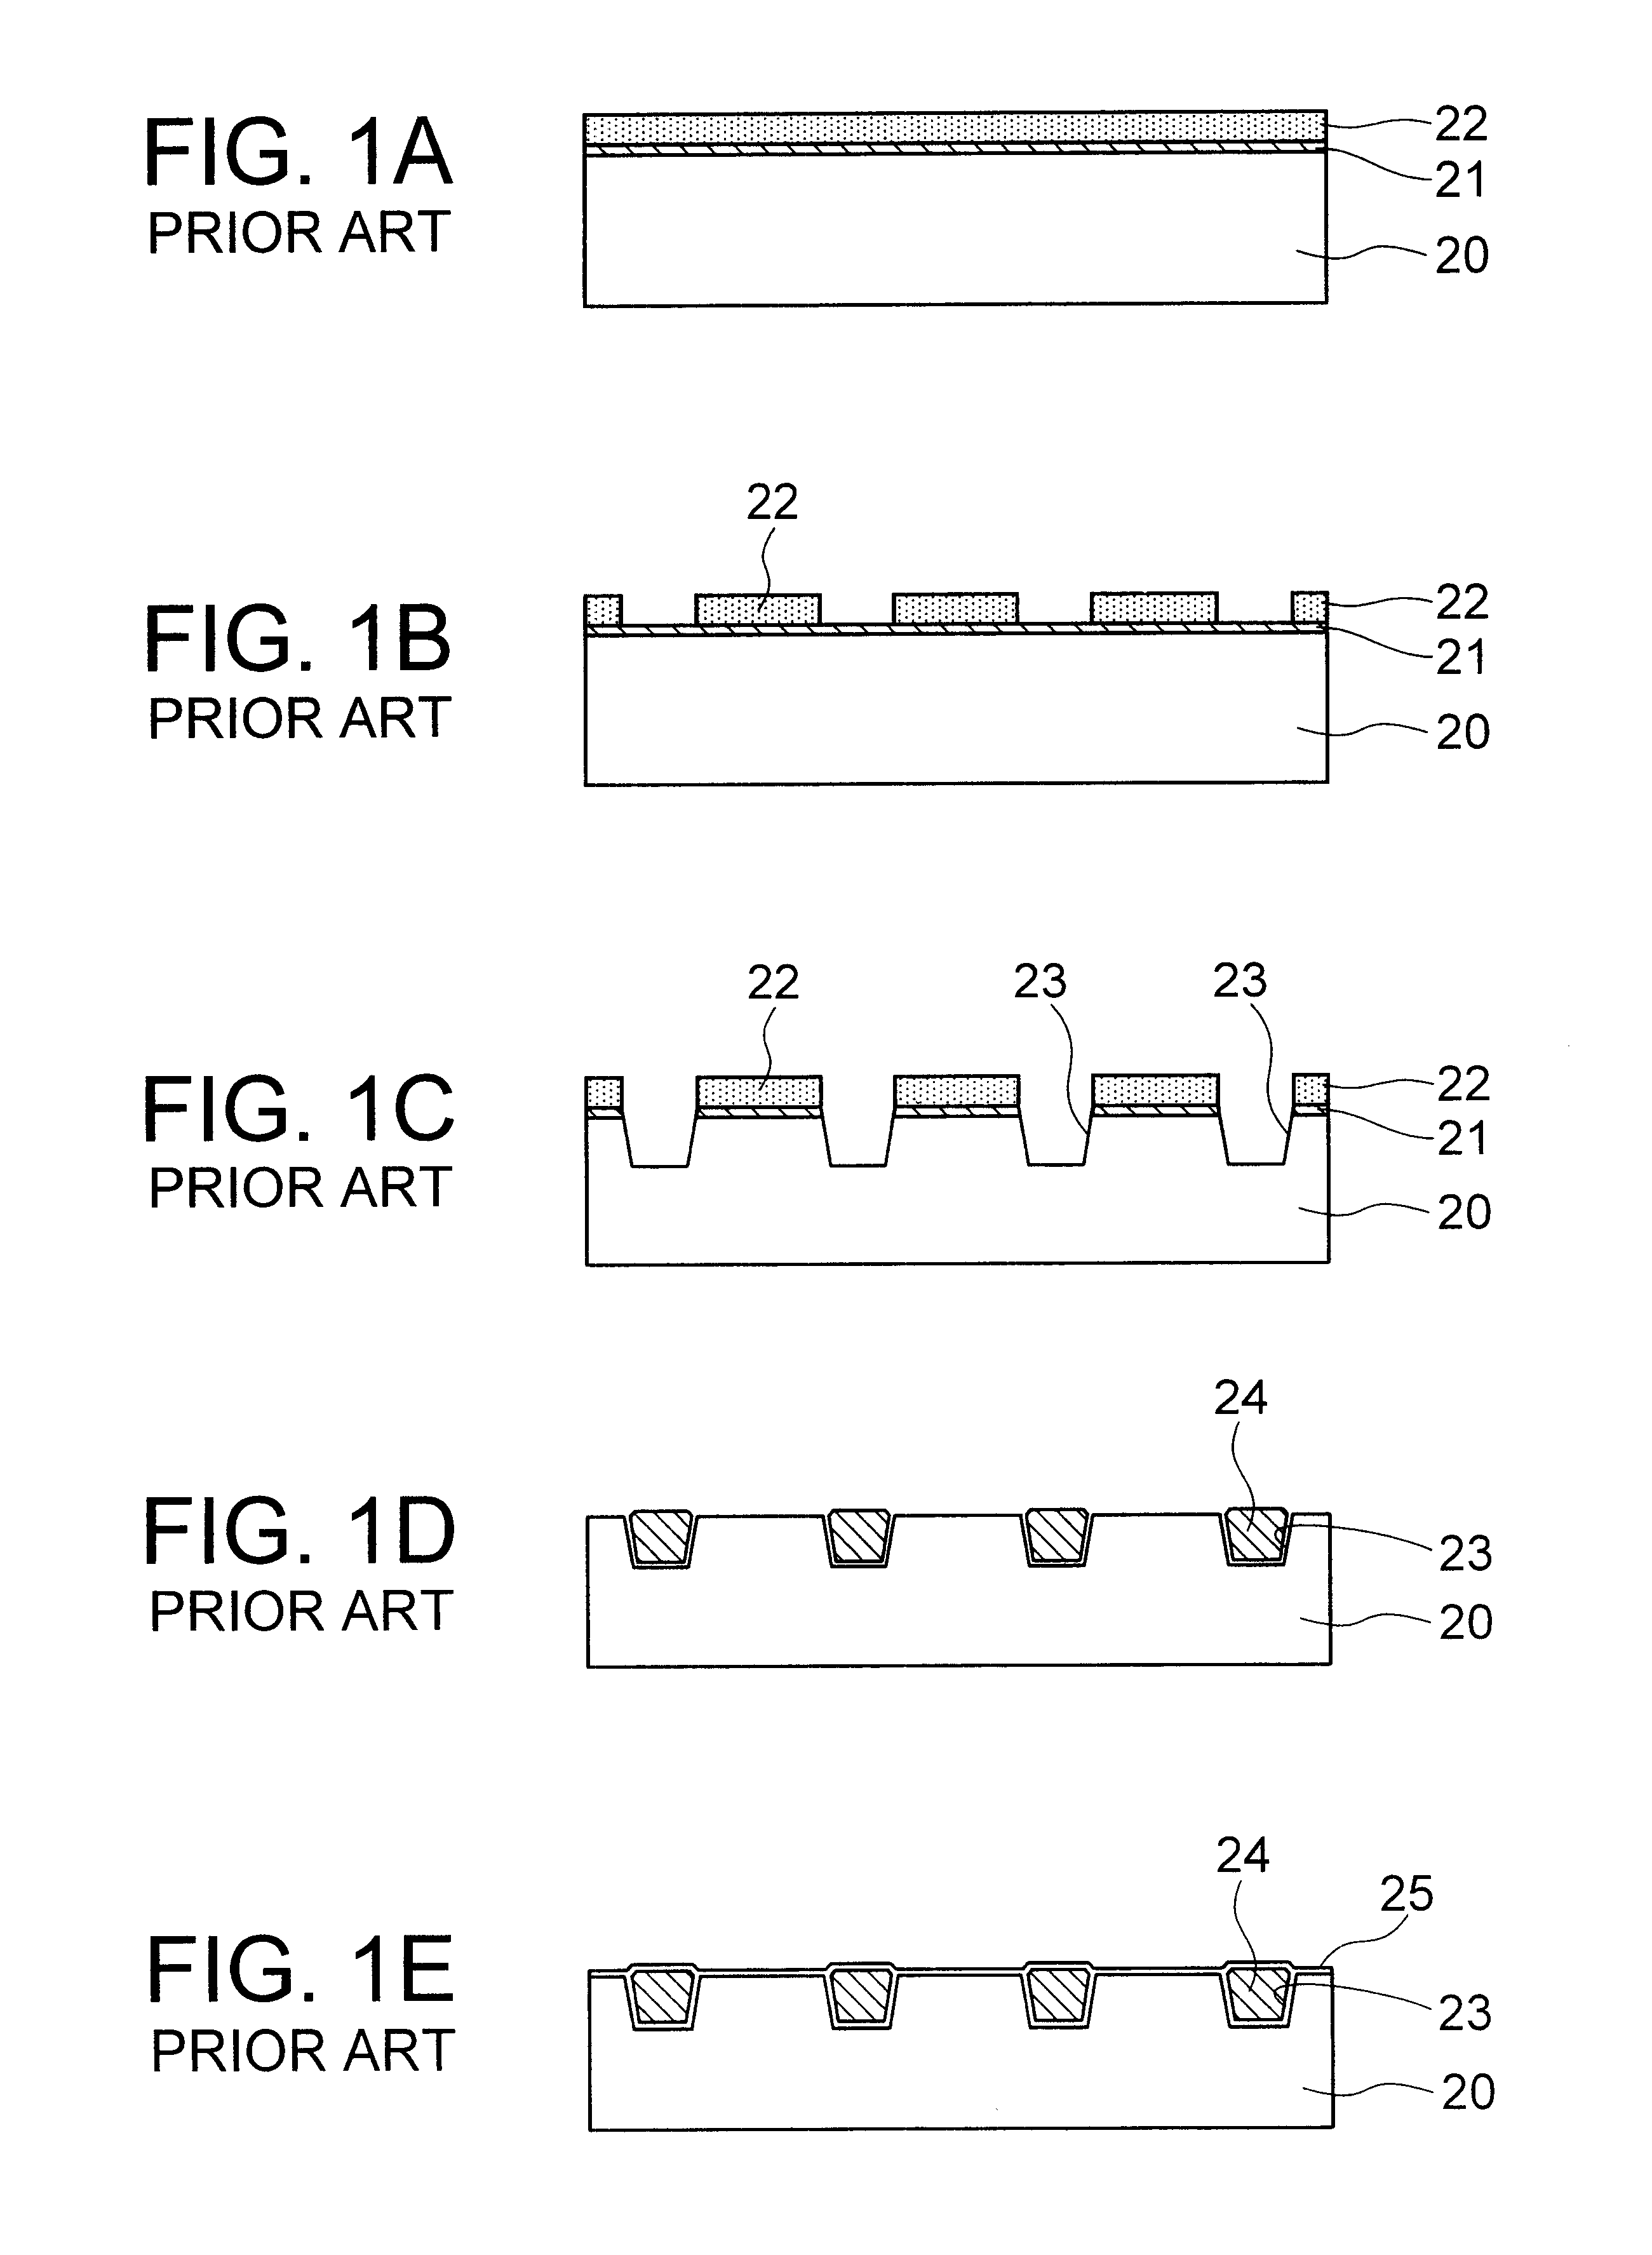 Semiconductor device including gate insulation films having different thicknesses